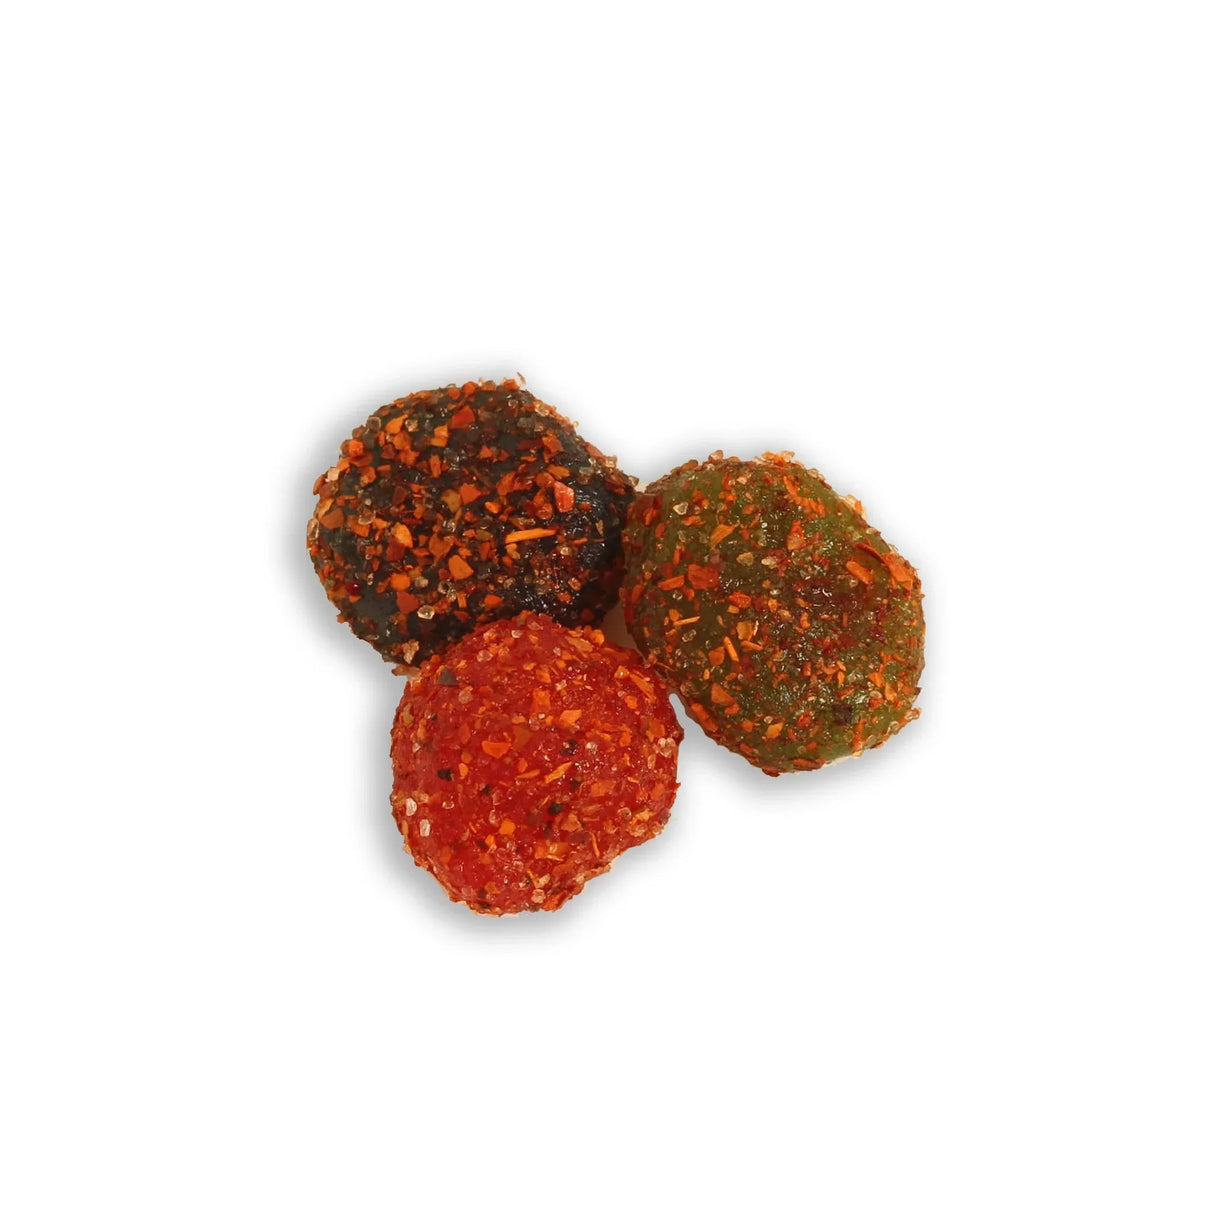 Chilli Bomba Spicy Gushers 8oz, coated with chili, top view on white background